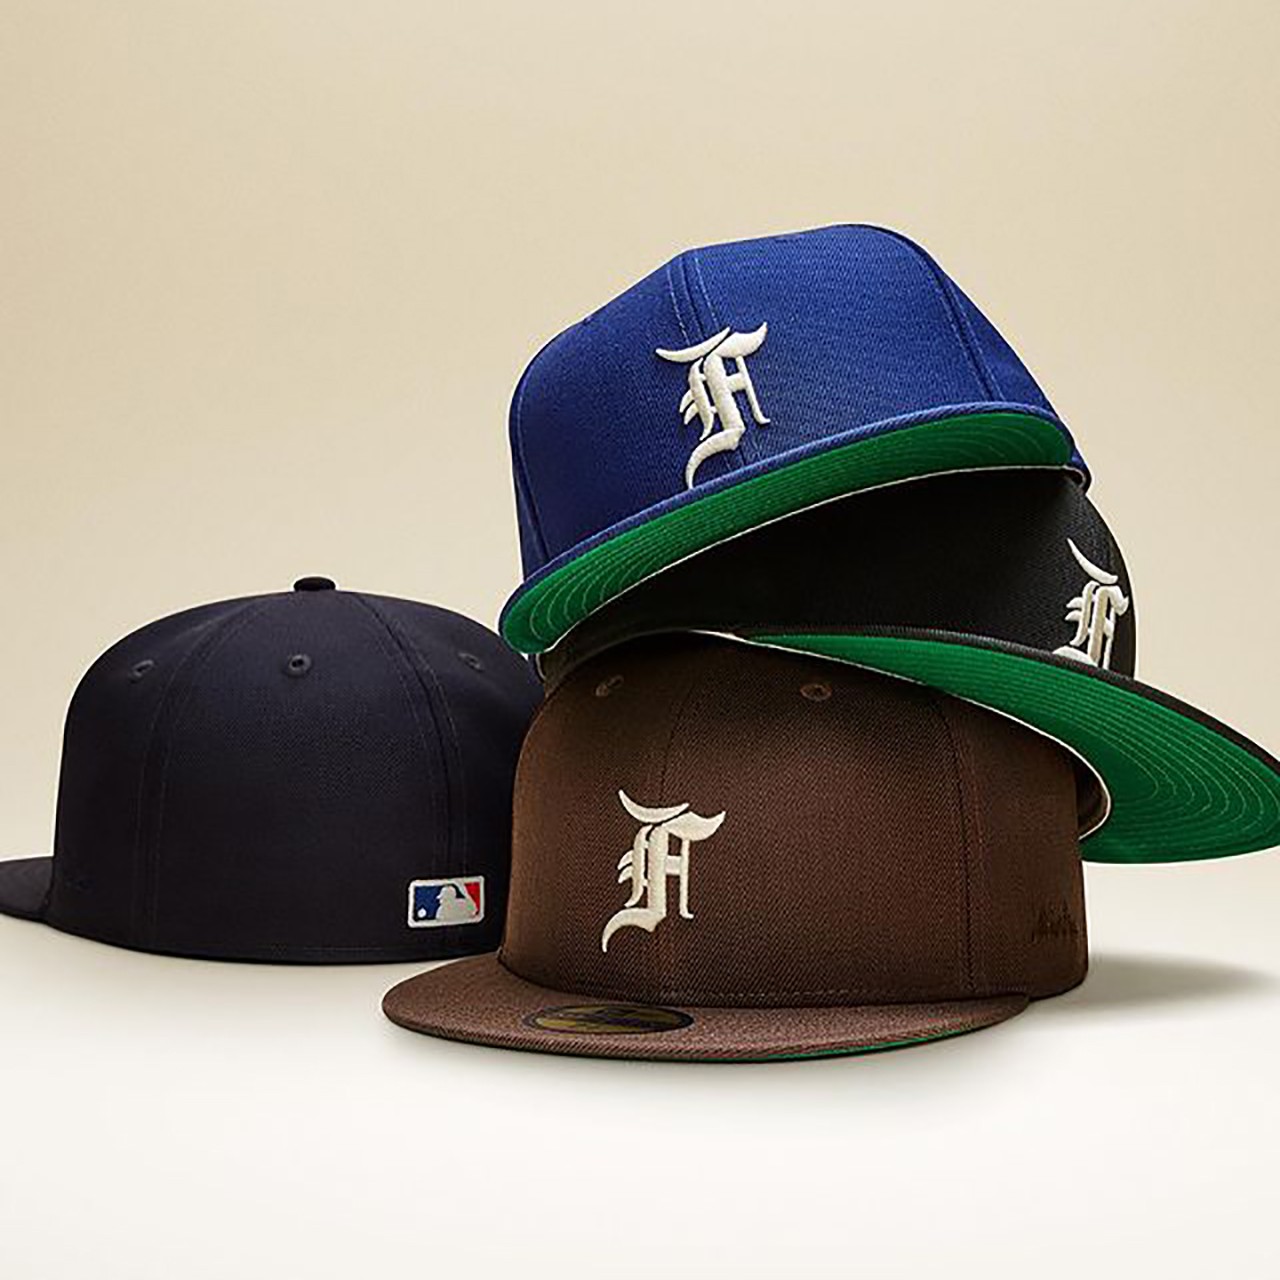 Fear of God and New Era to launch MLB AllStar cap collection